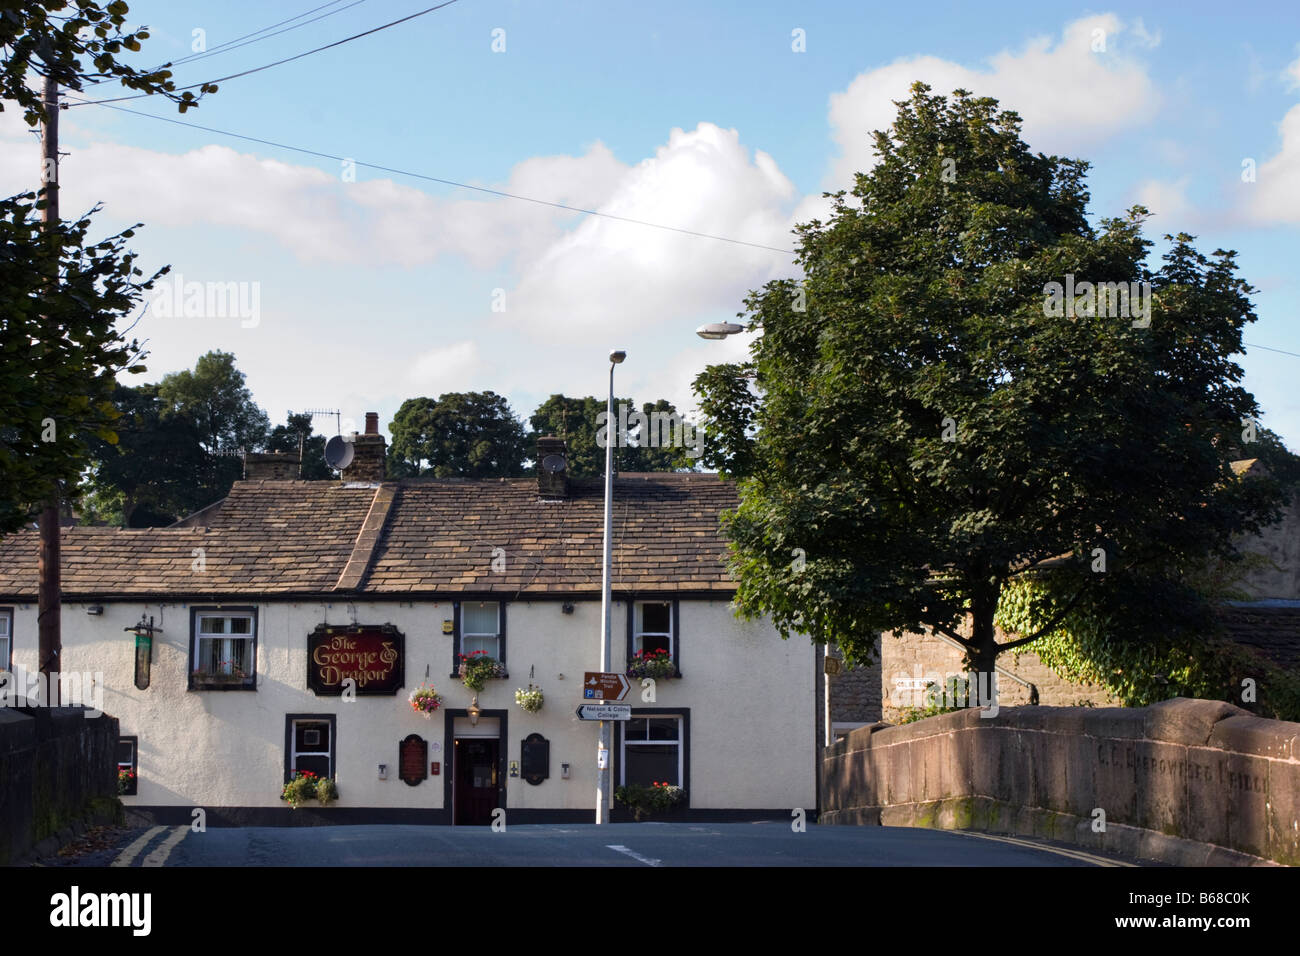 The George and Dragon pub at Barrowford in Pendle Stock Photo